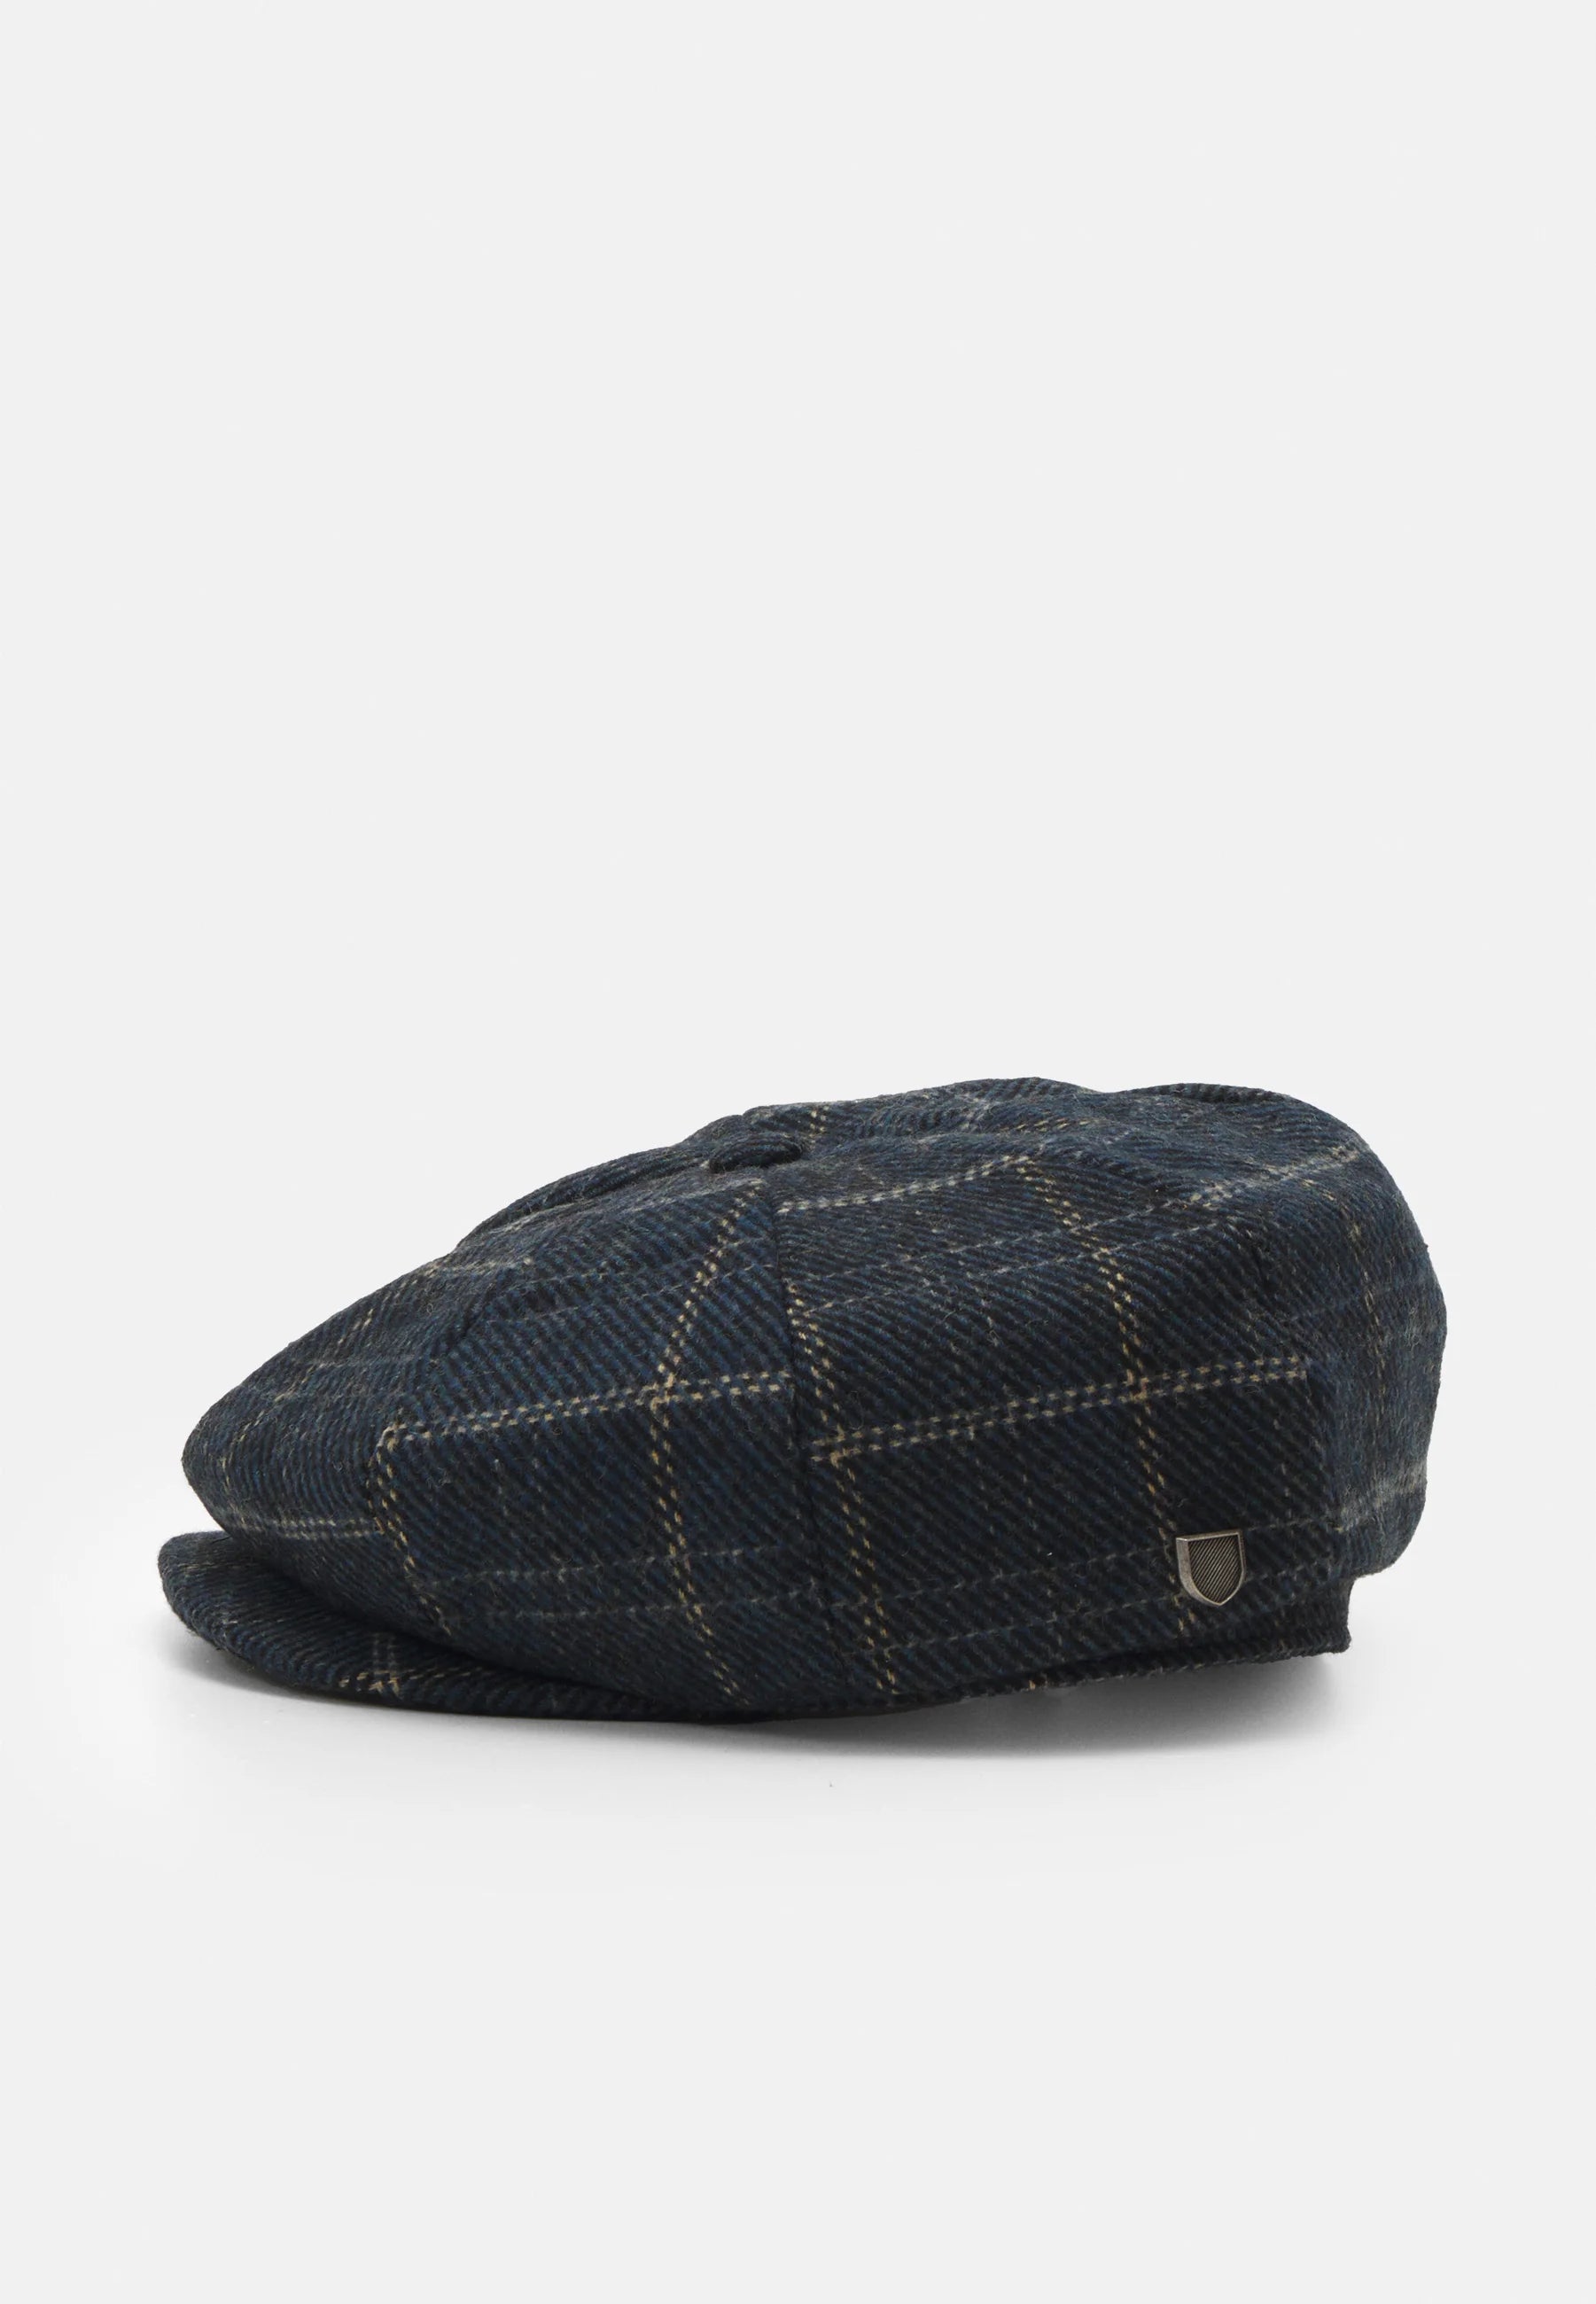 Brood Baggy Snap Cap unisex - navy/black/off whithe